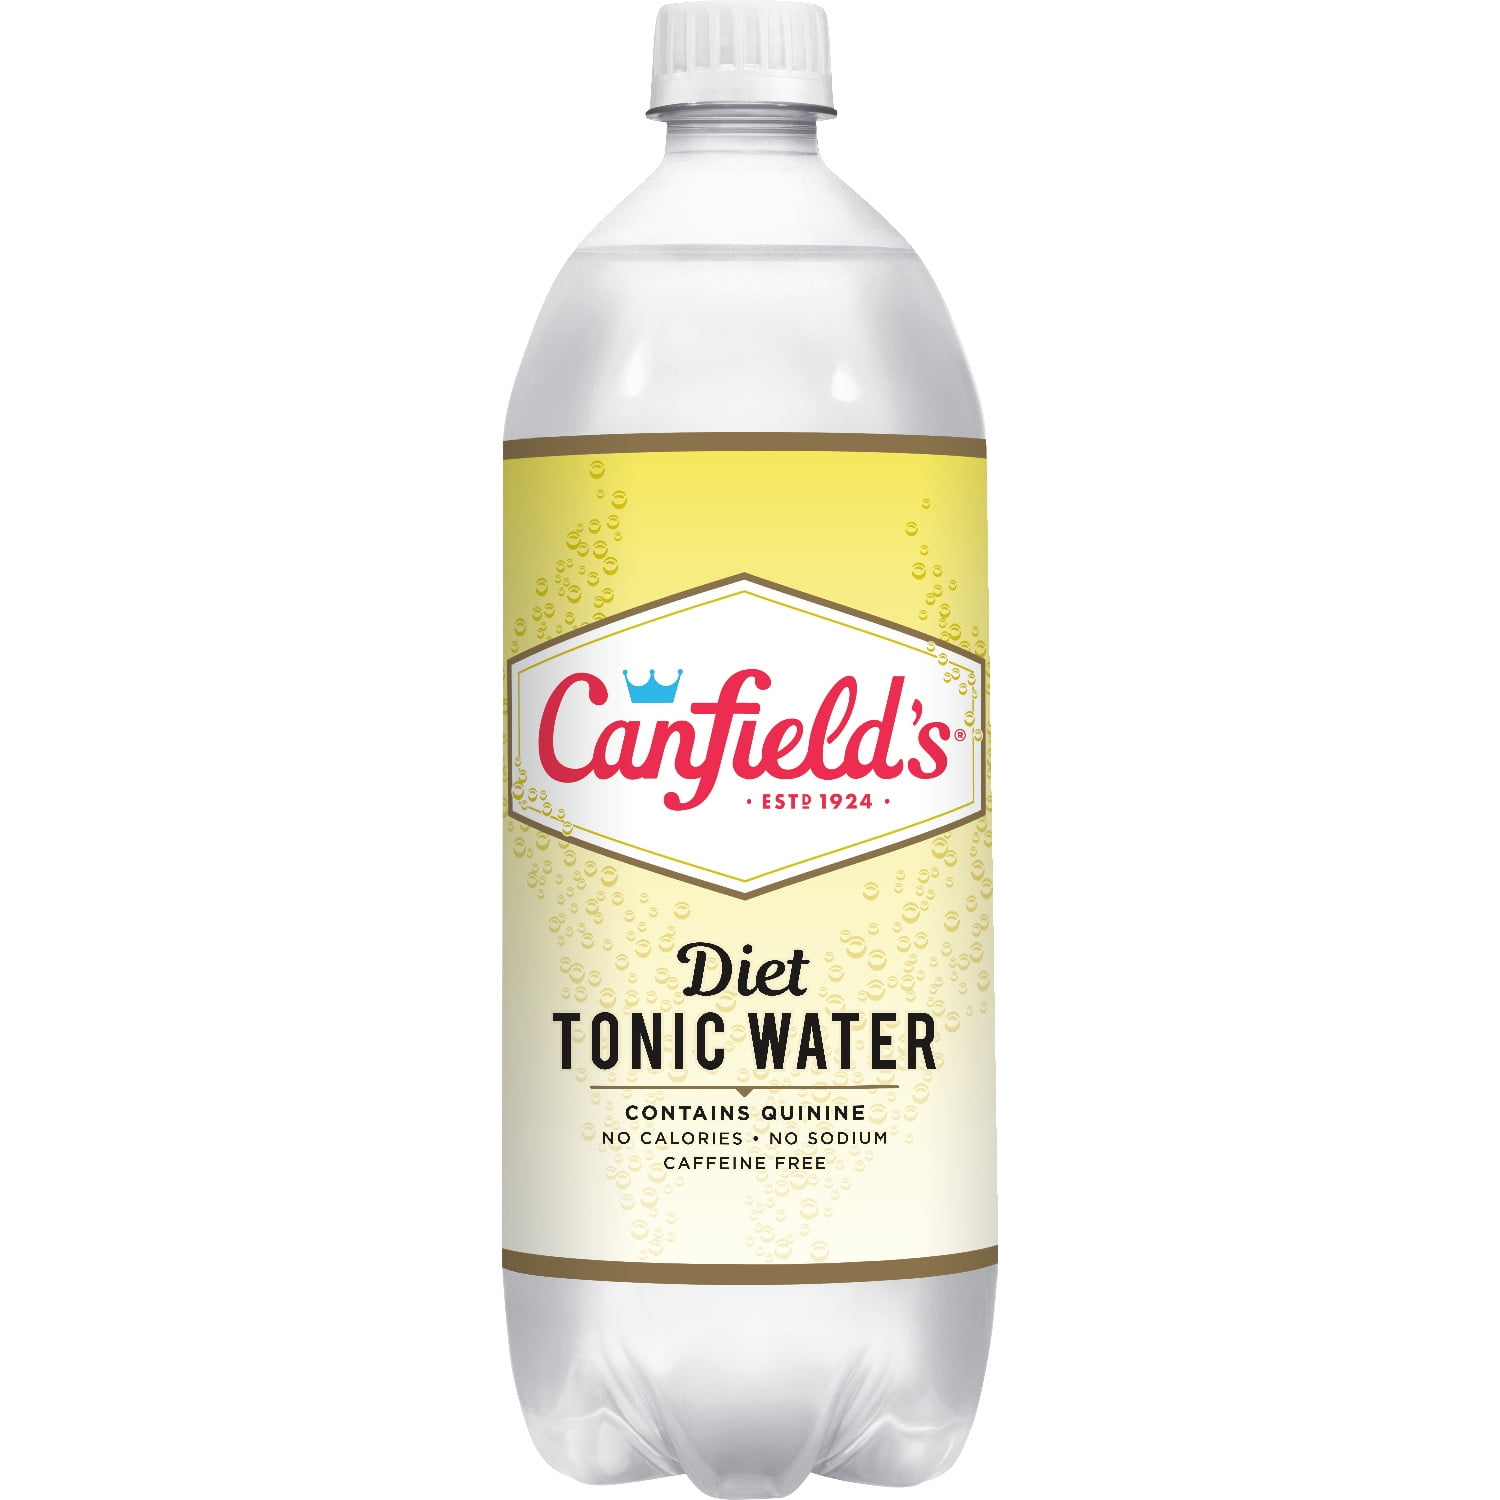 does diet tonic water contain caffeine?